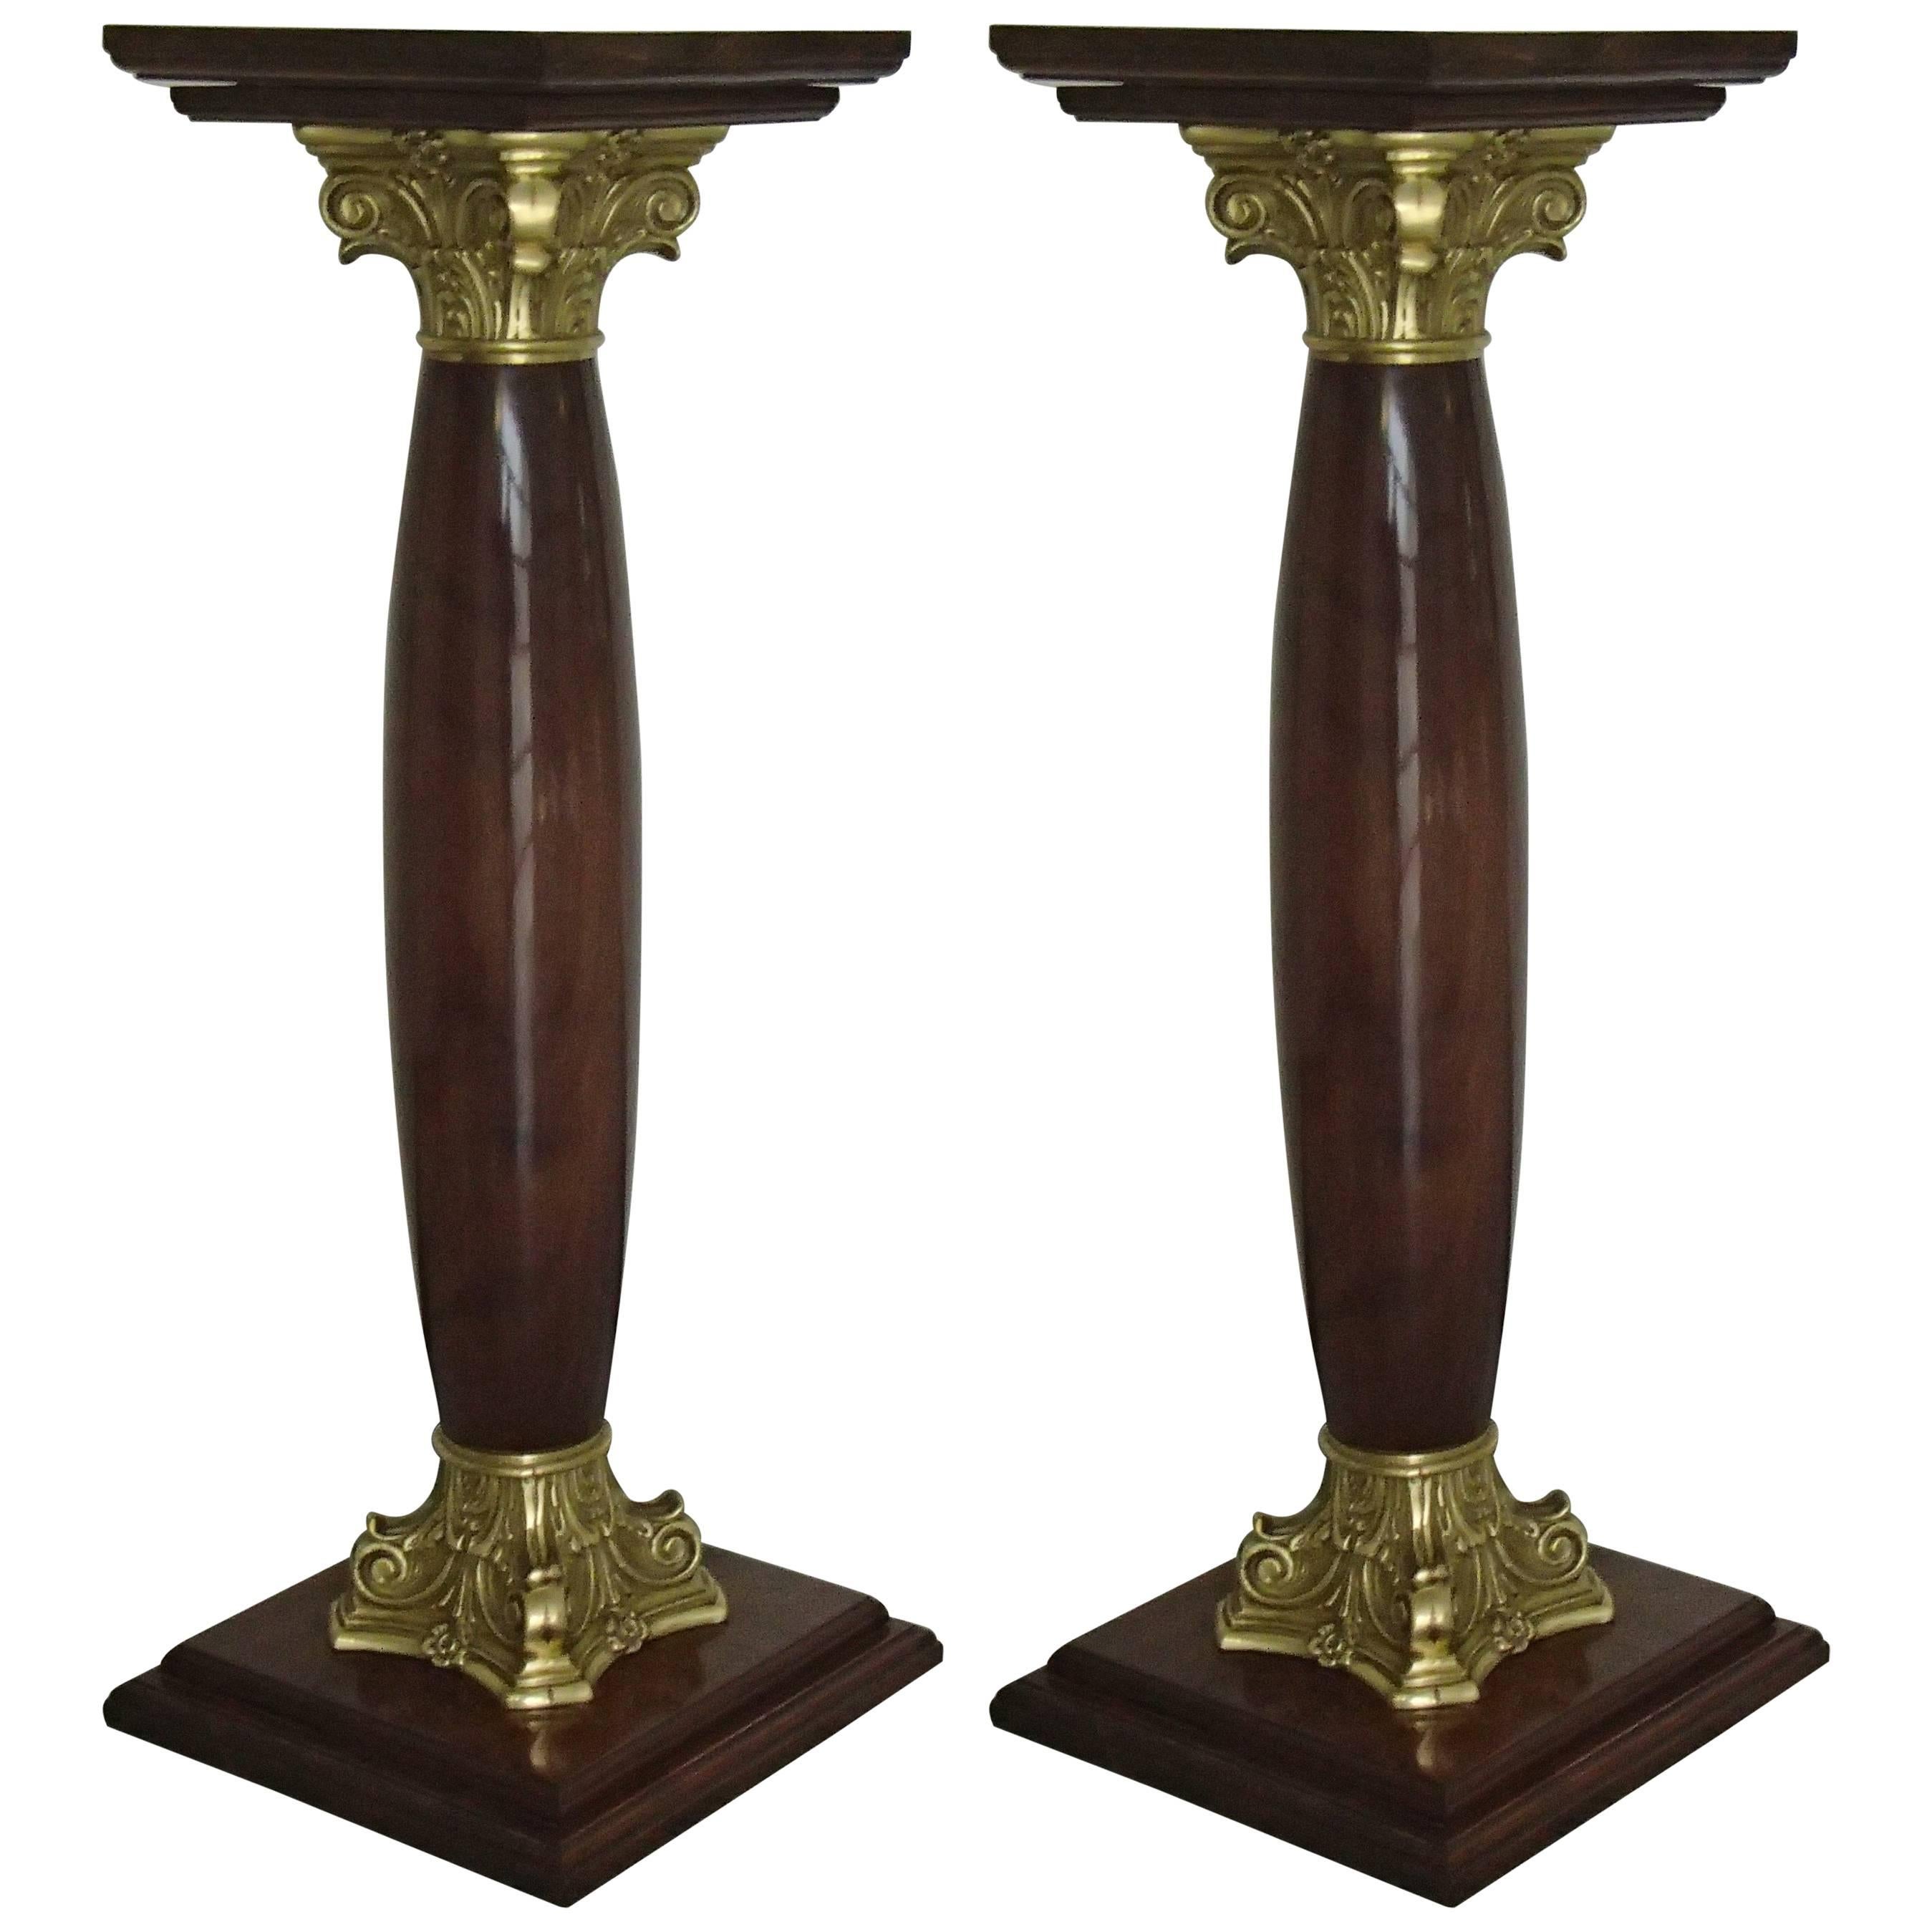 Midcentury Decorative Pair of Pedestals Walnut with Brass For Sale